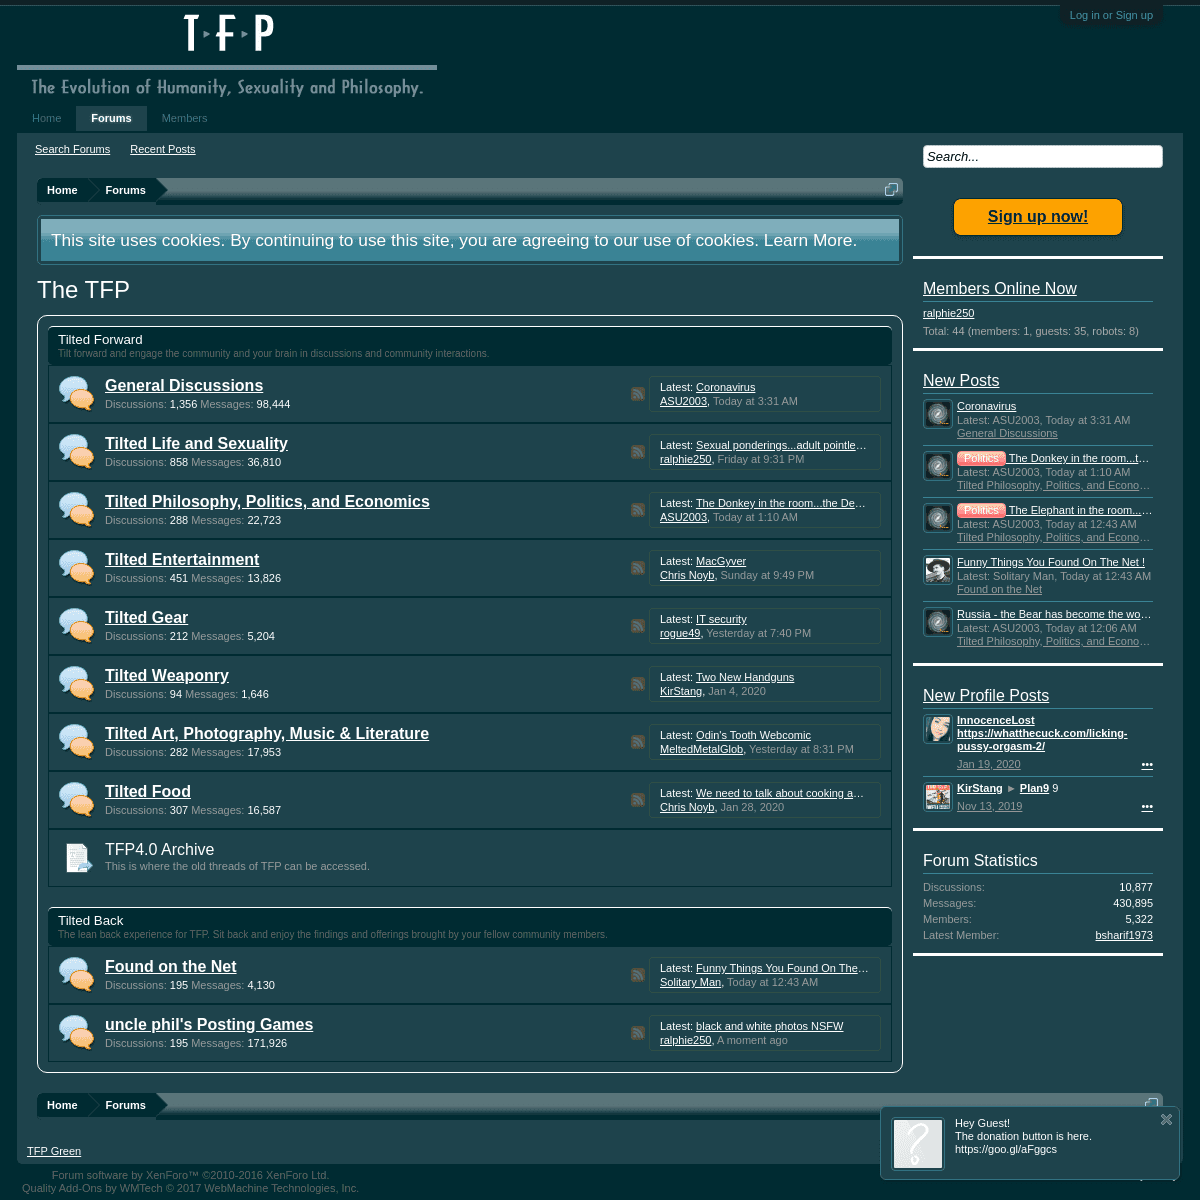 A complete backup of thetfp.com